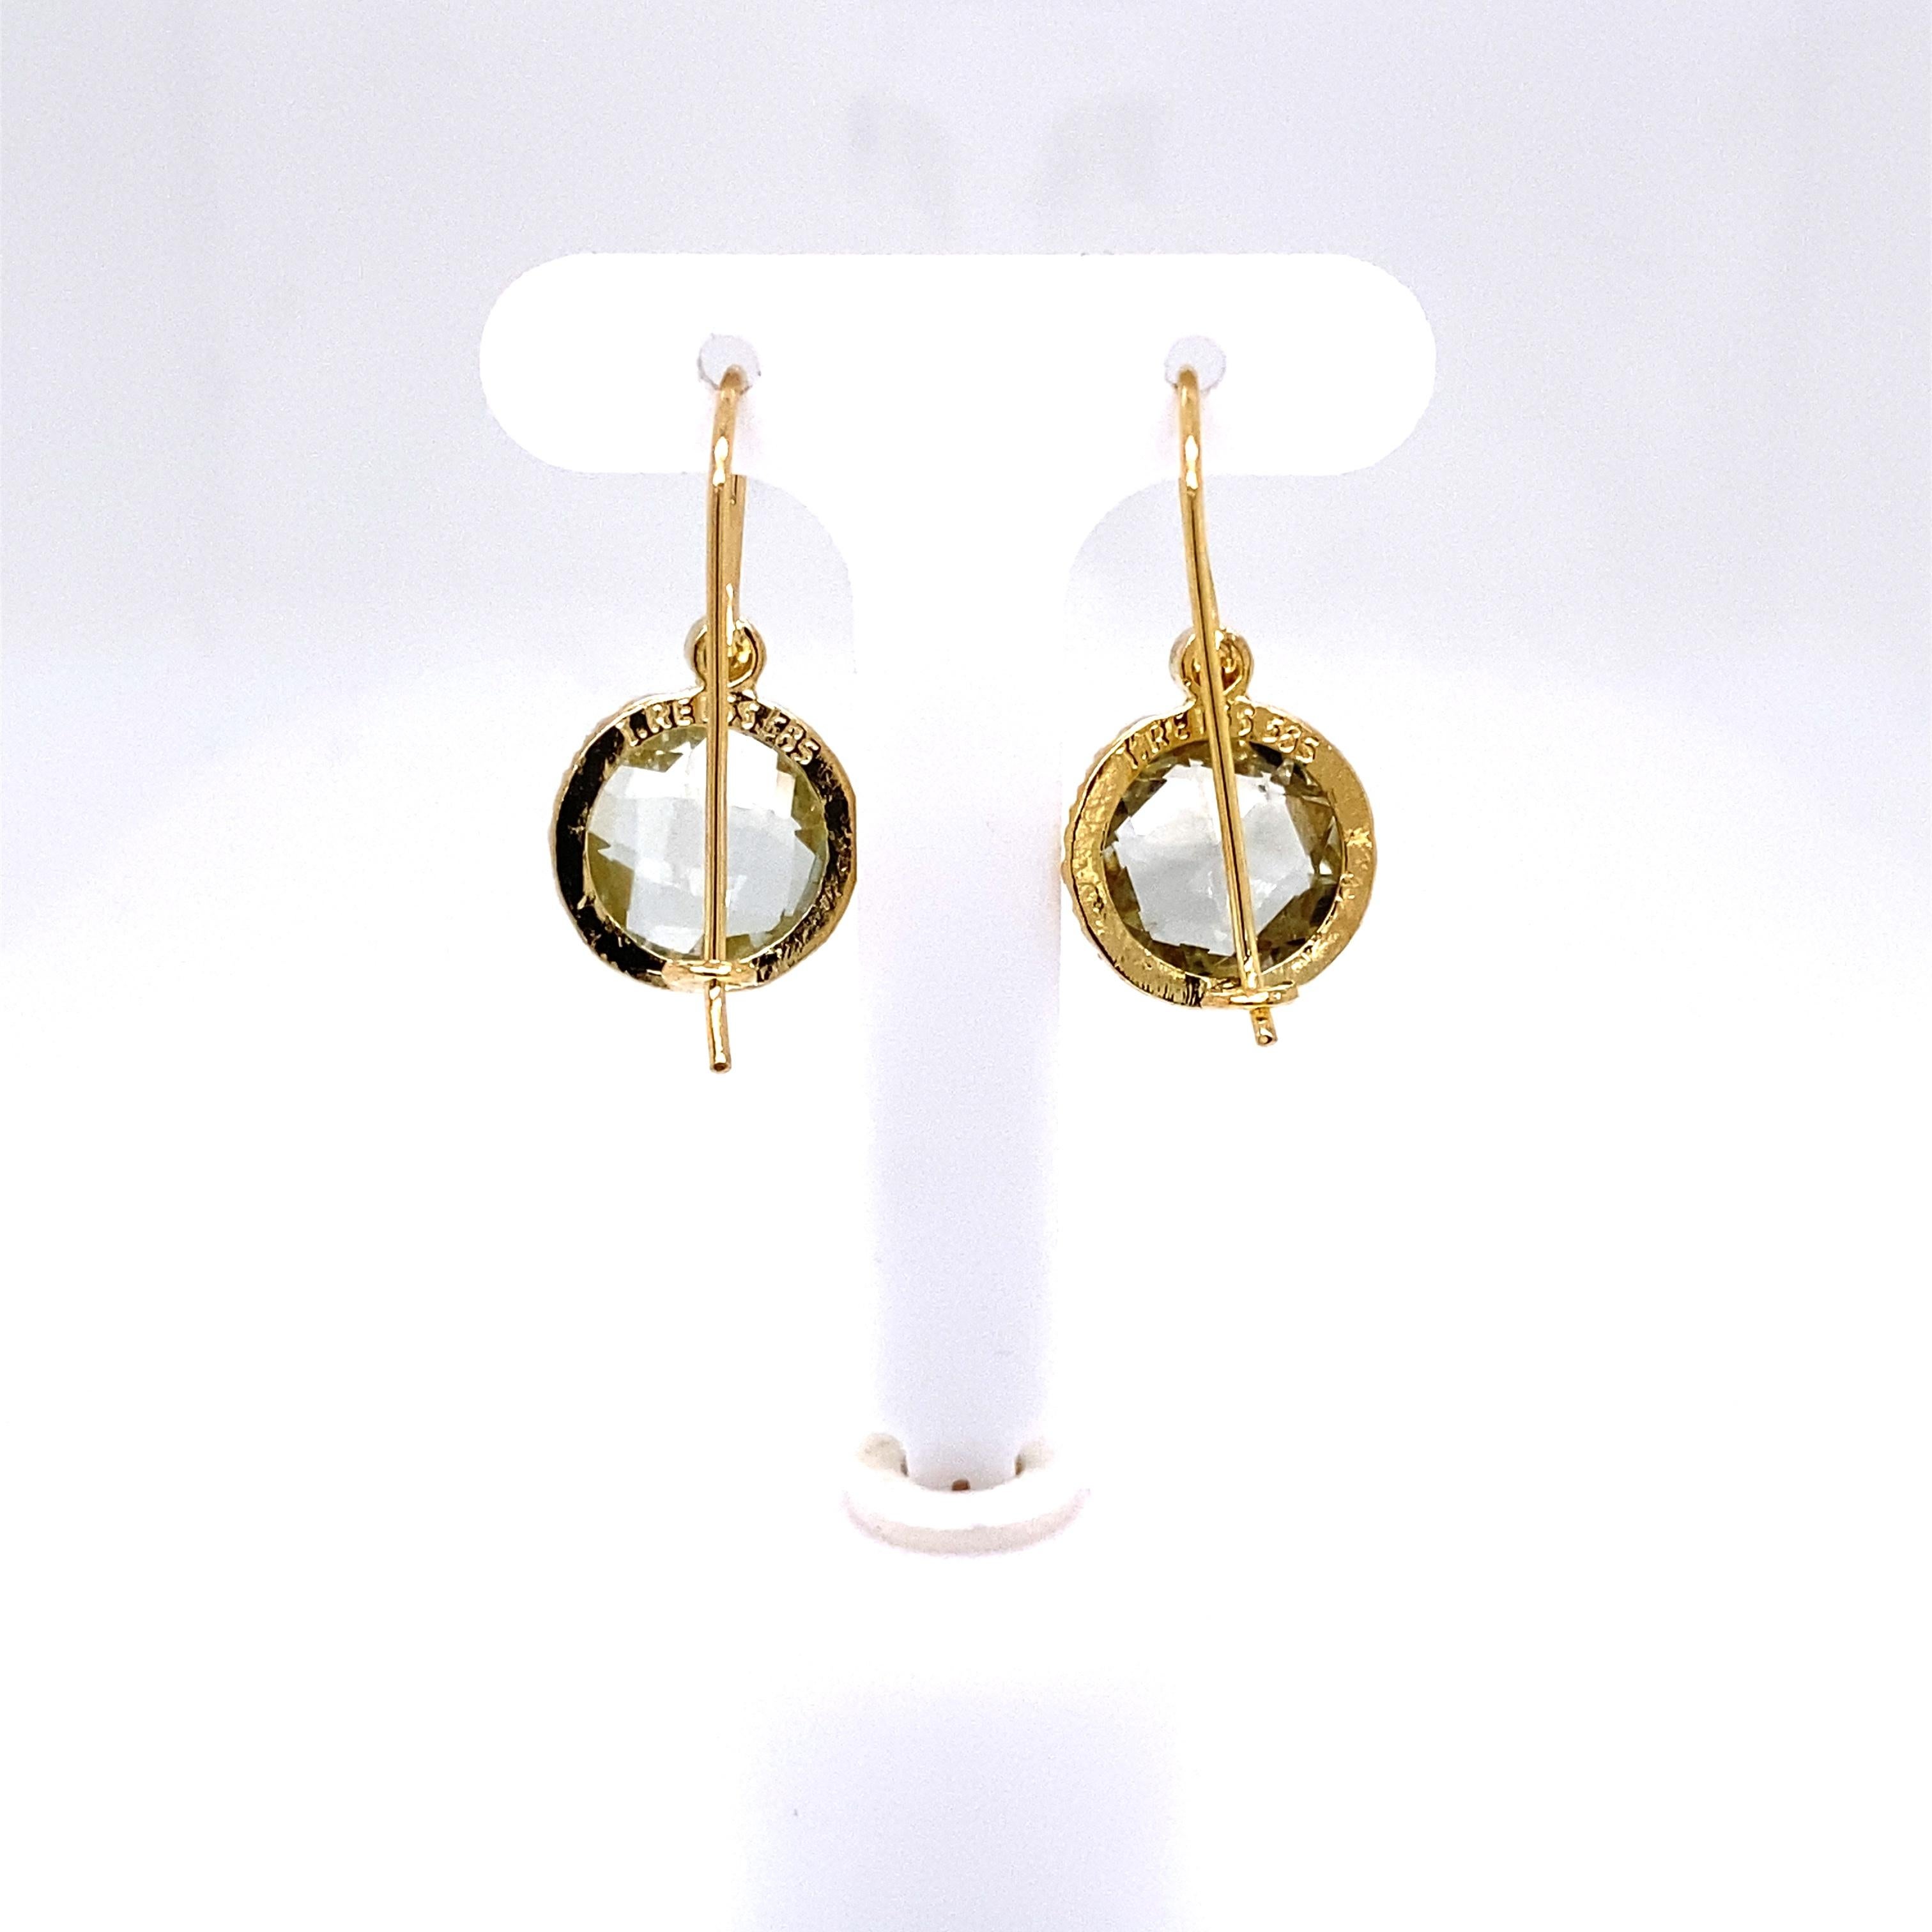 14 Karat Yellow Gold Hand-Crafted Polish-Finished Drop Earrings, Centered with a 10mm Round Checkerboard-Cut Semi-Precious Green Amethyst Color Stone, Accented with 0.03 Carats of Bezel Set Diamonds.
